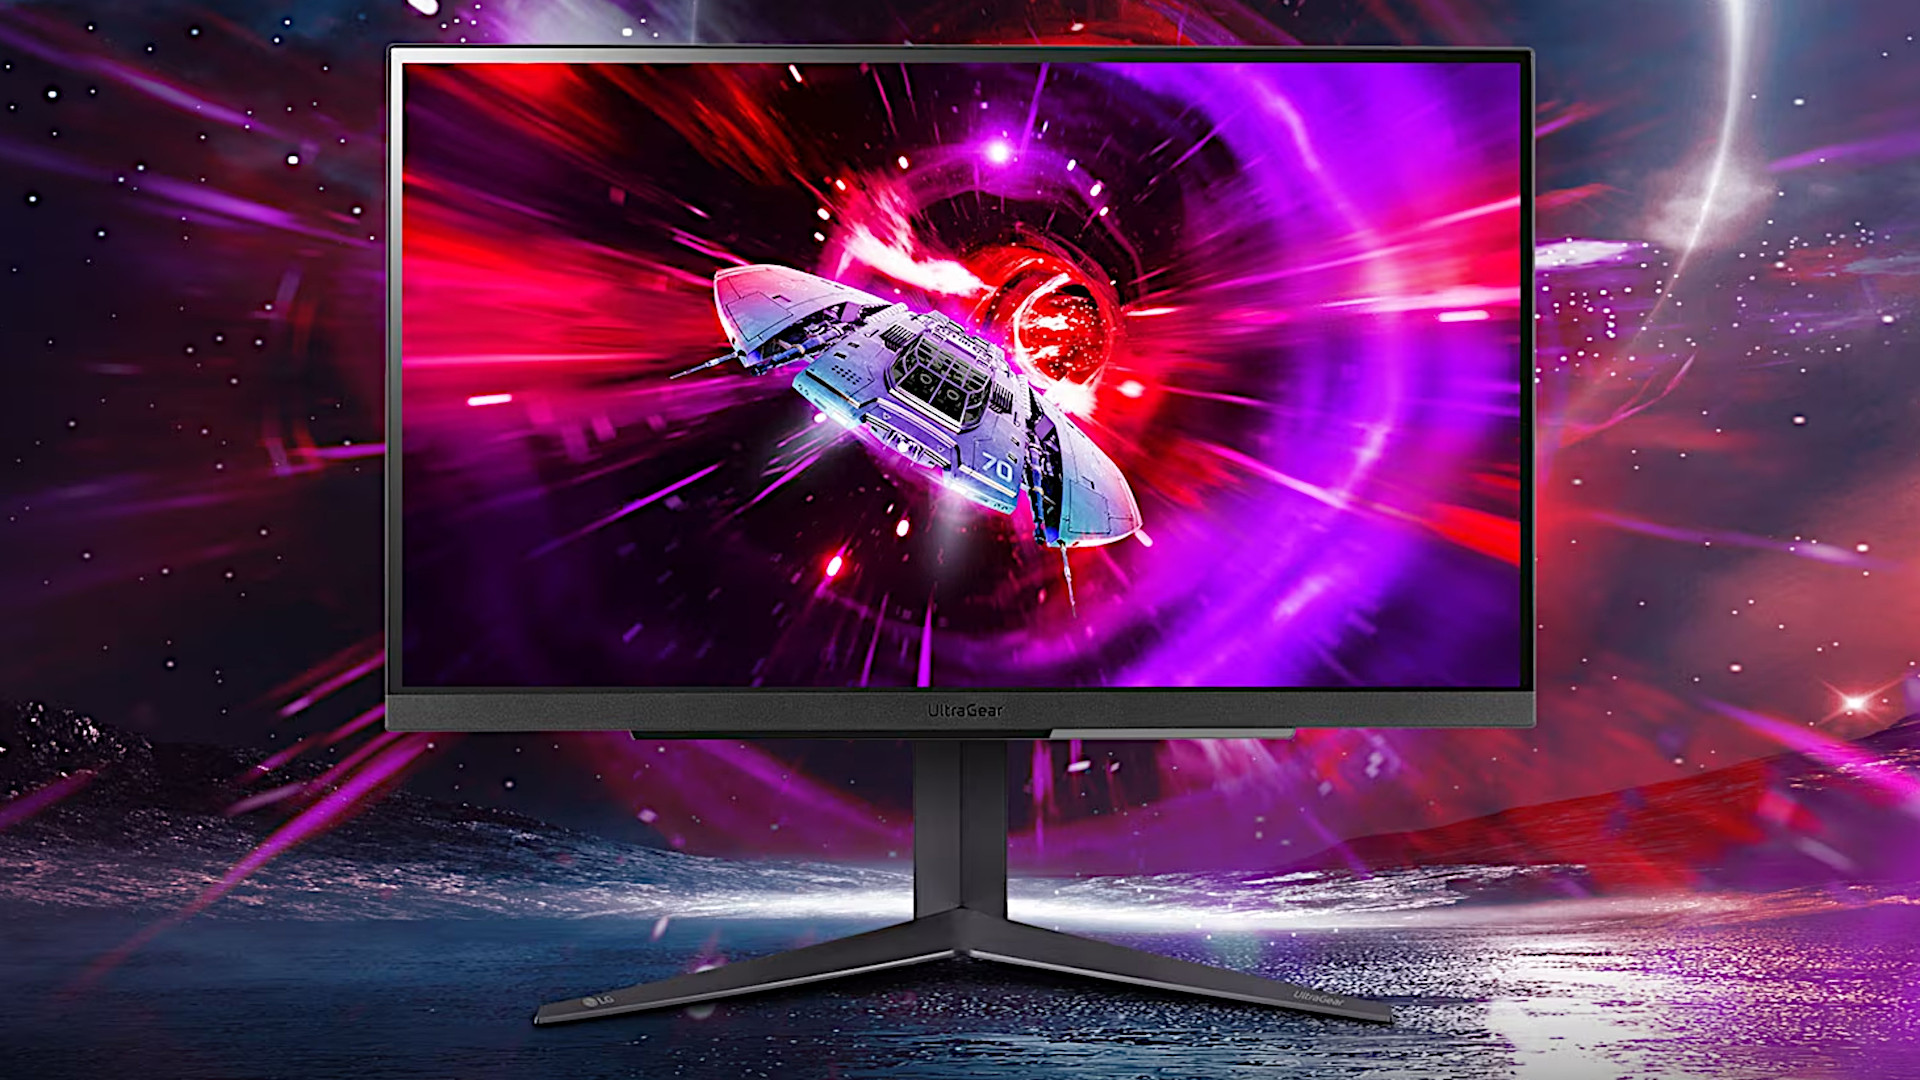 This 27-inch LG gaming monitor is back at its lowest ever price